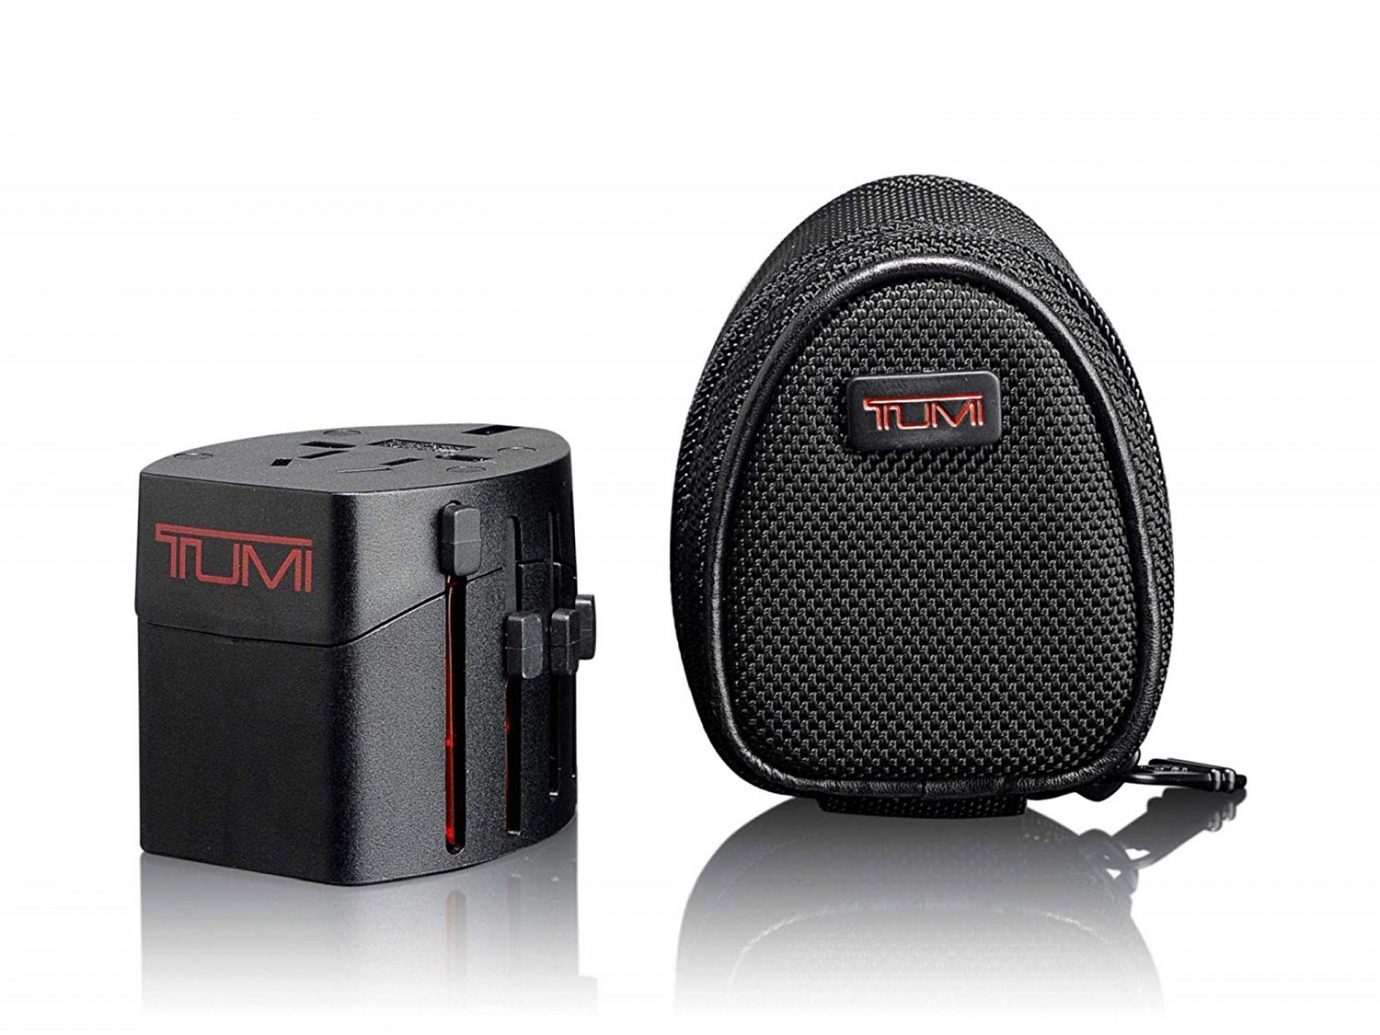 Tumi all-in one adapter